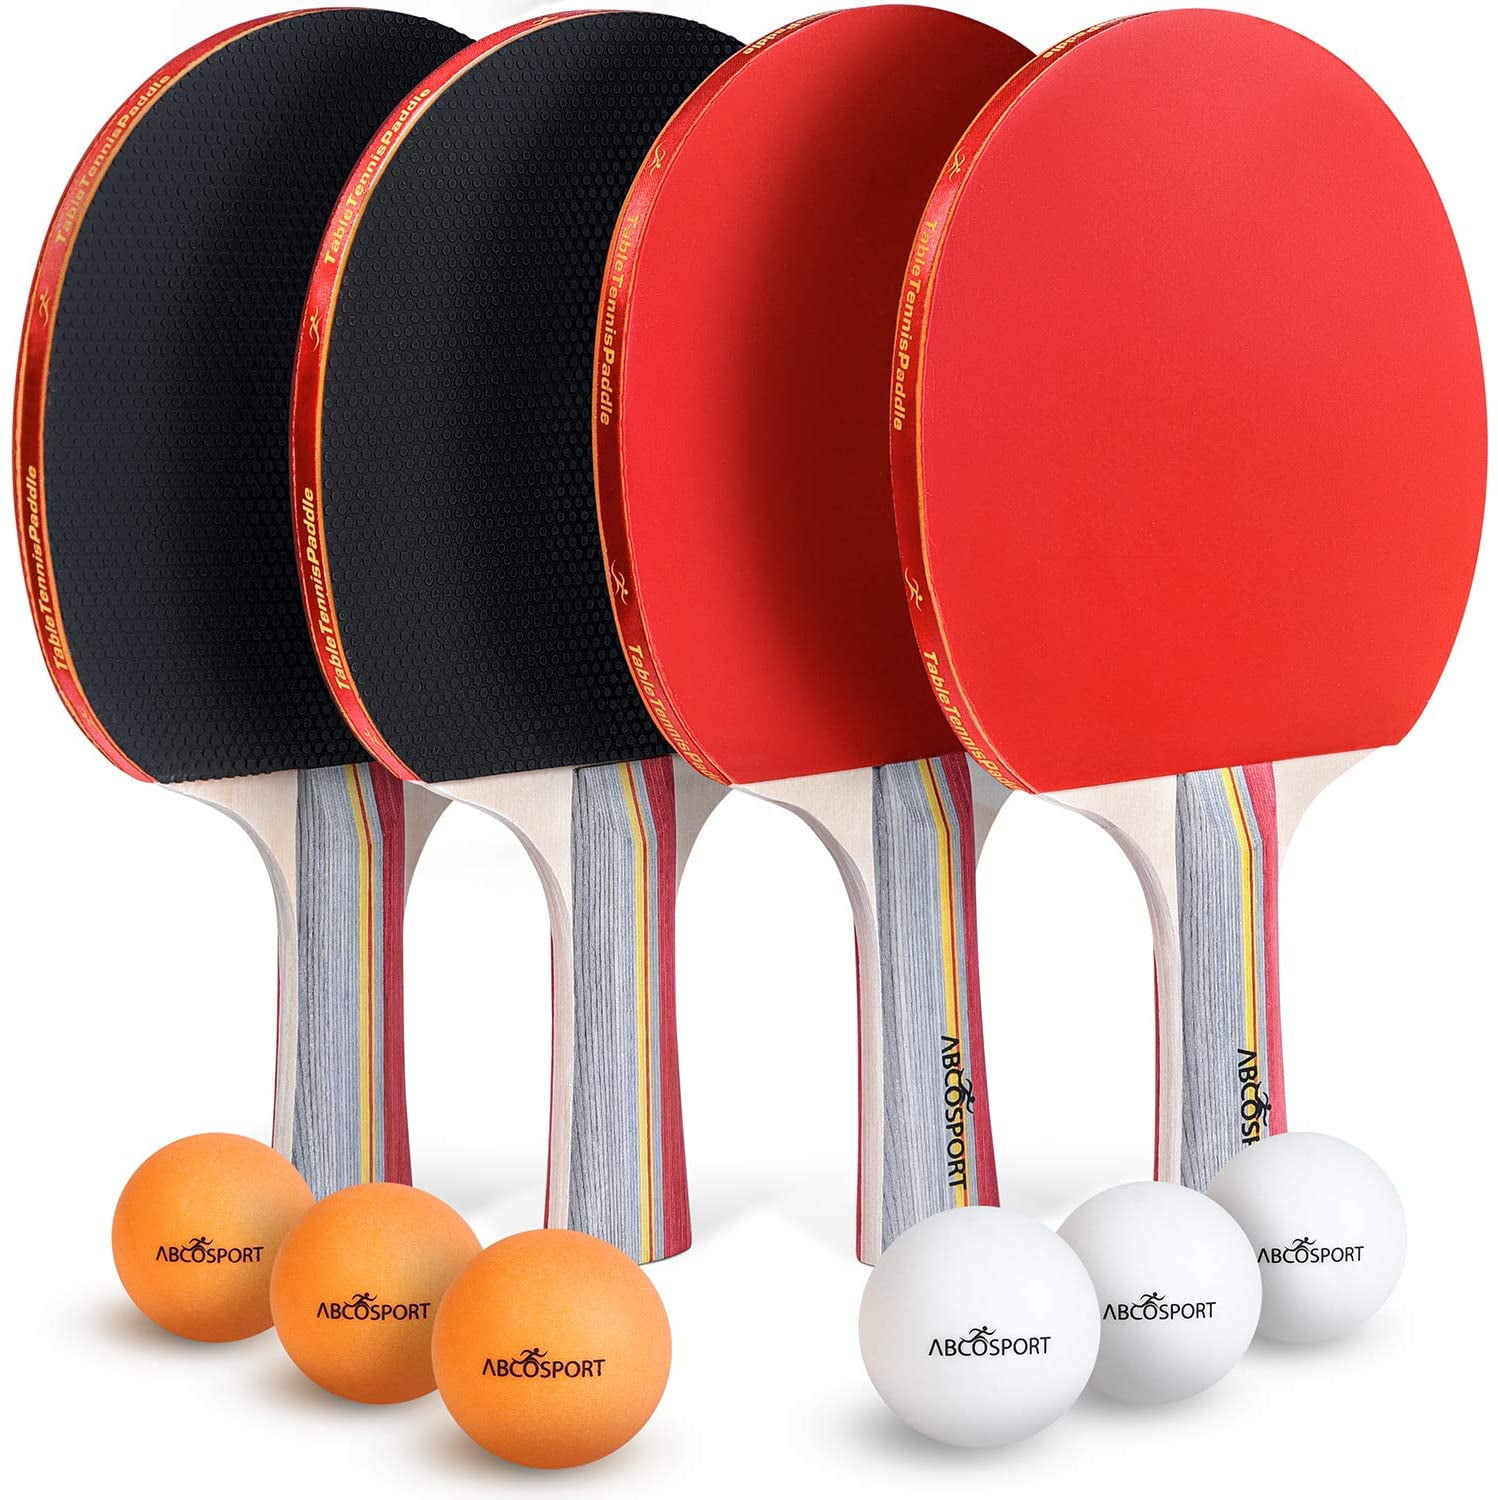 Franklin Ping Pong Paddles 2 Player Table Tennis Set Paddle With 3 Balls for sale online 